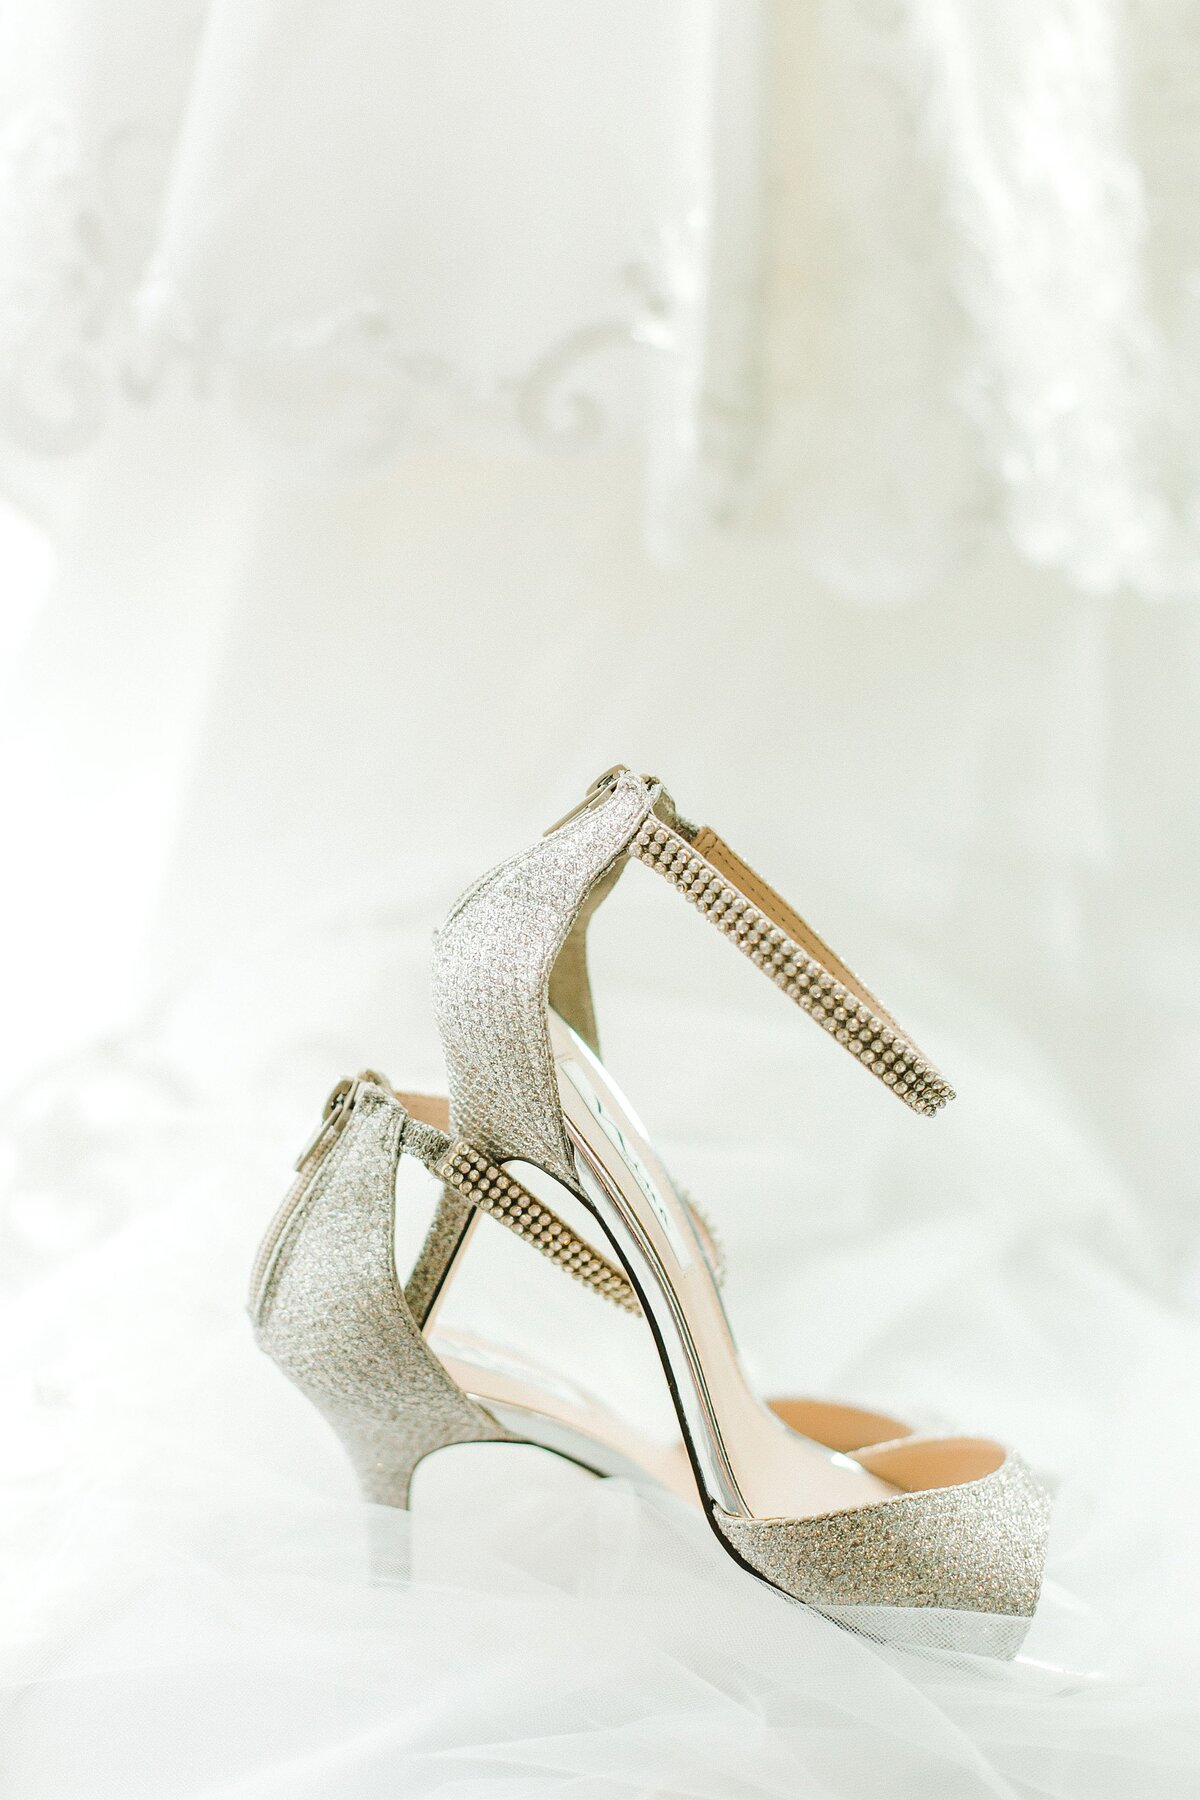 WEDDING DAY SHOE PICTURES